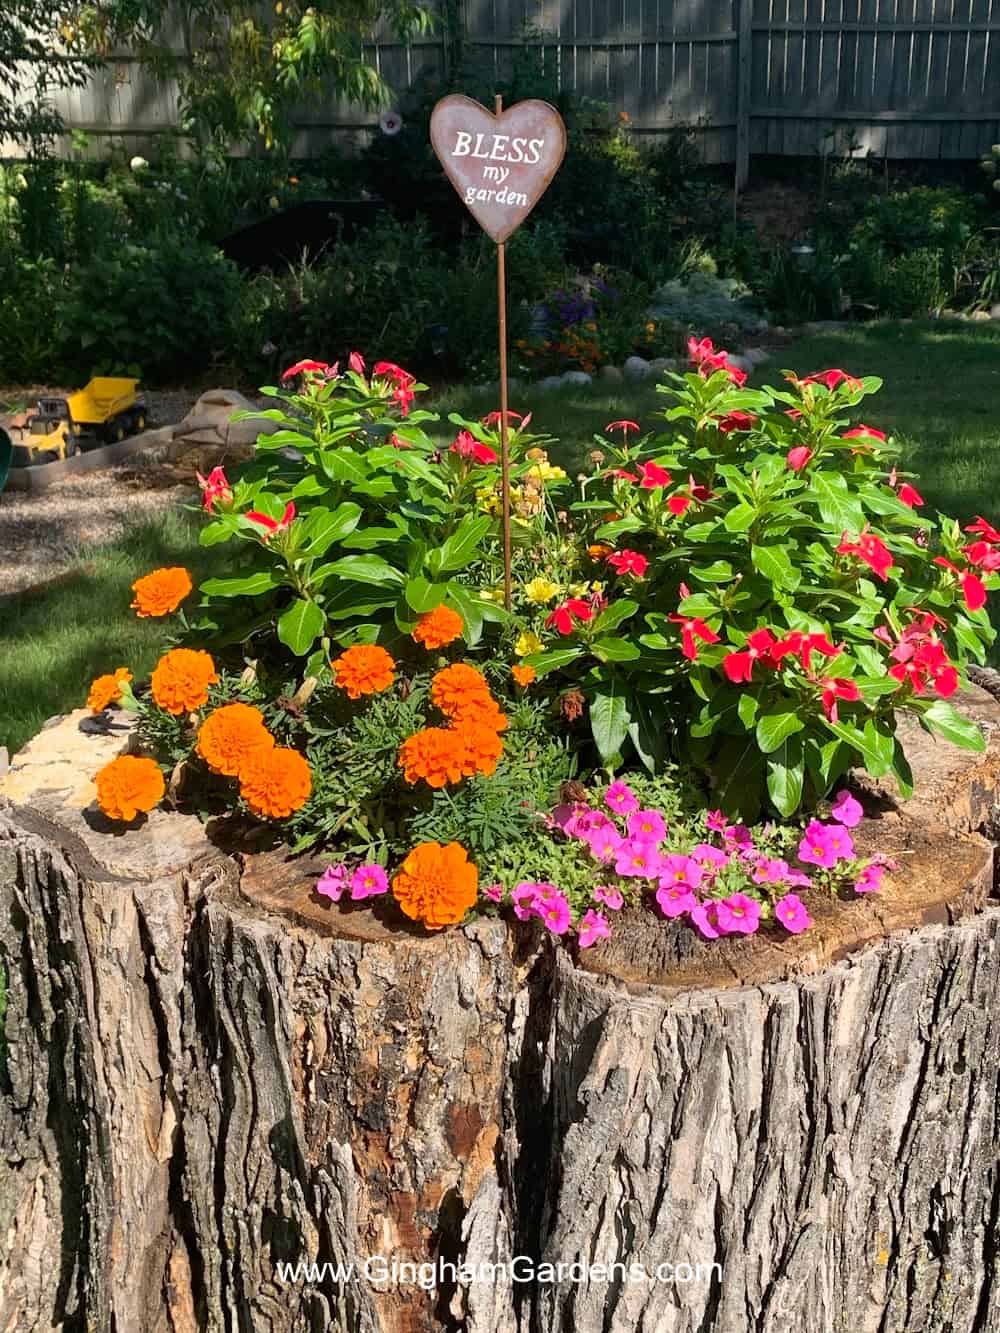 How to Make a Tree Stump Planter (Lots of Creative Ideas